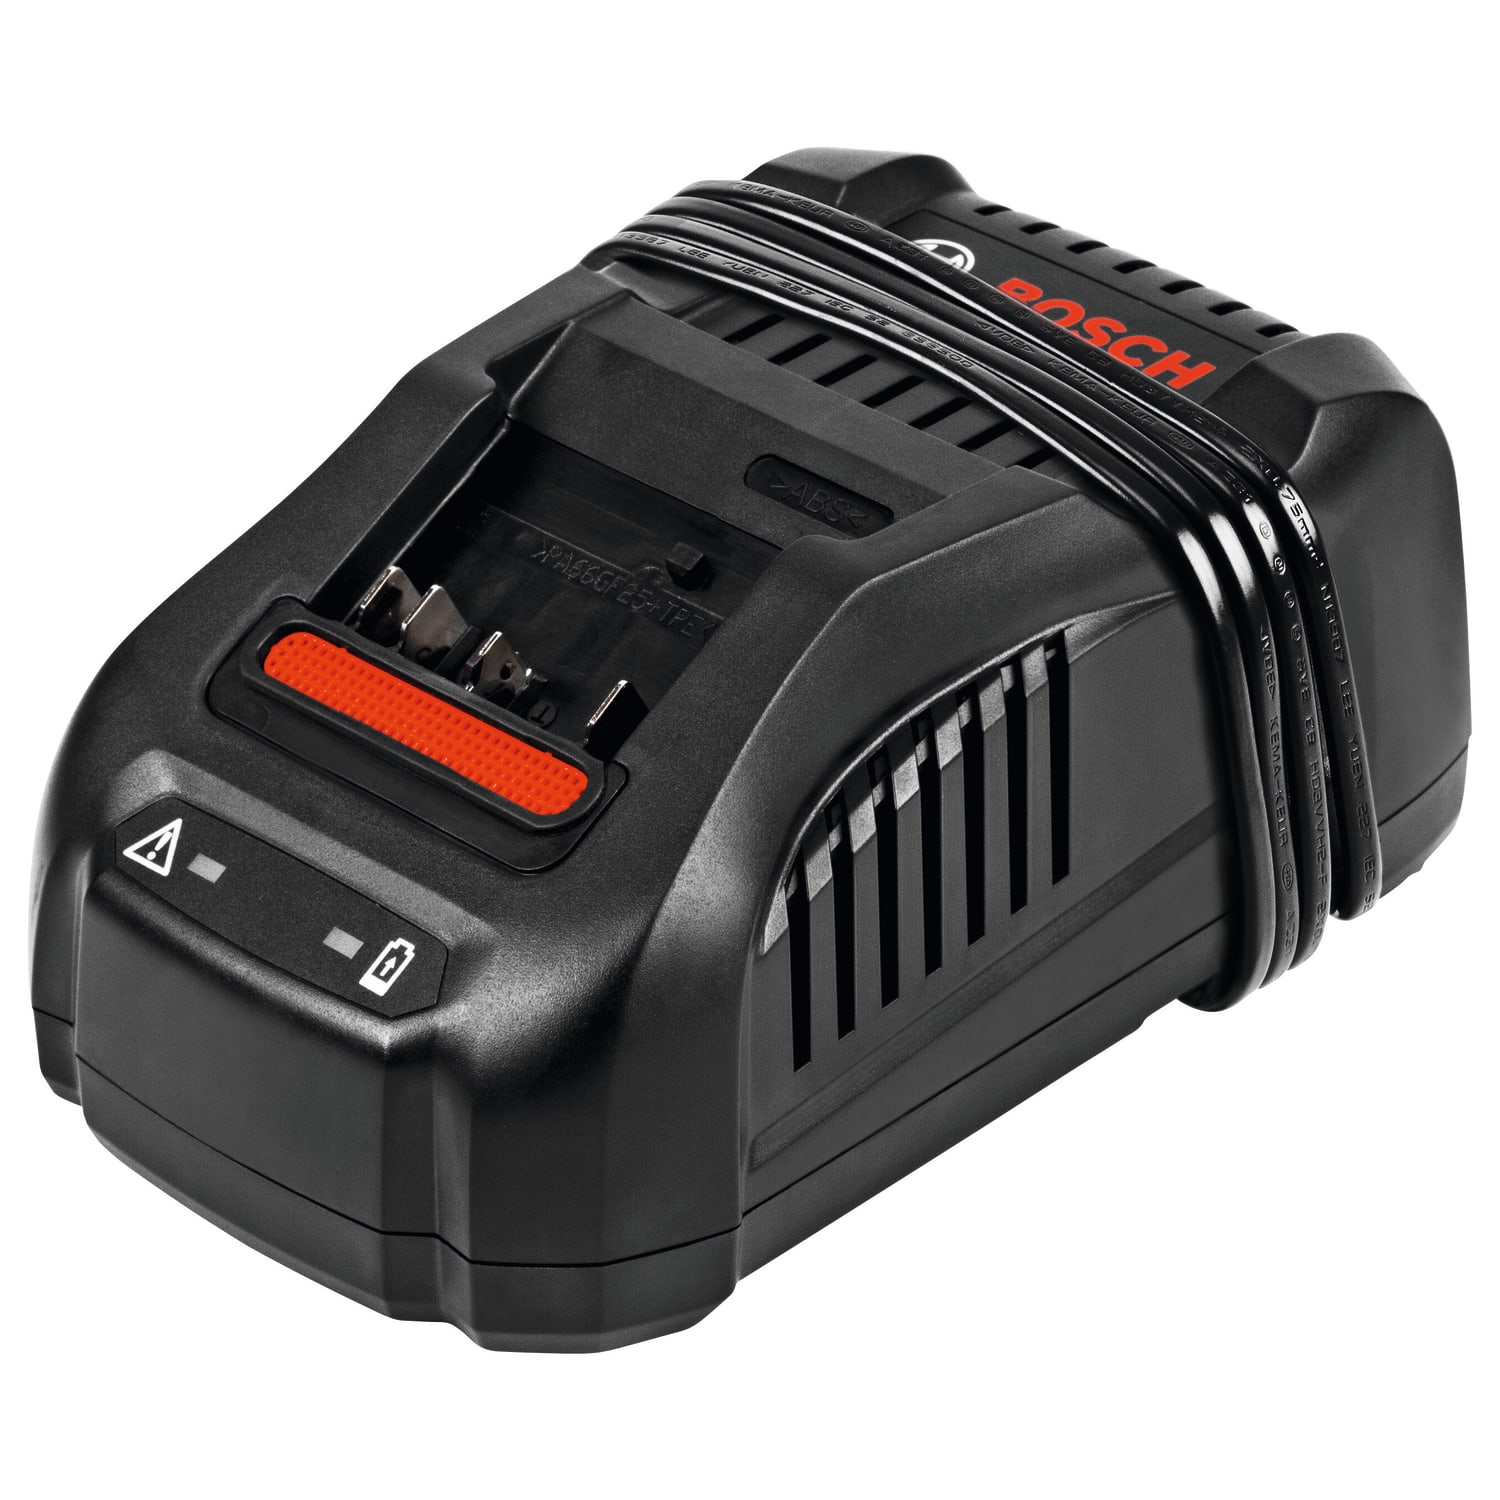 Bosch Charger GAL 12V - 40 Professional (The 12 V Fast charger)